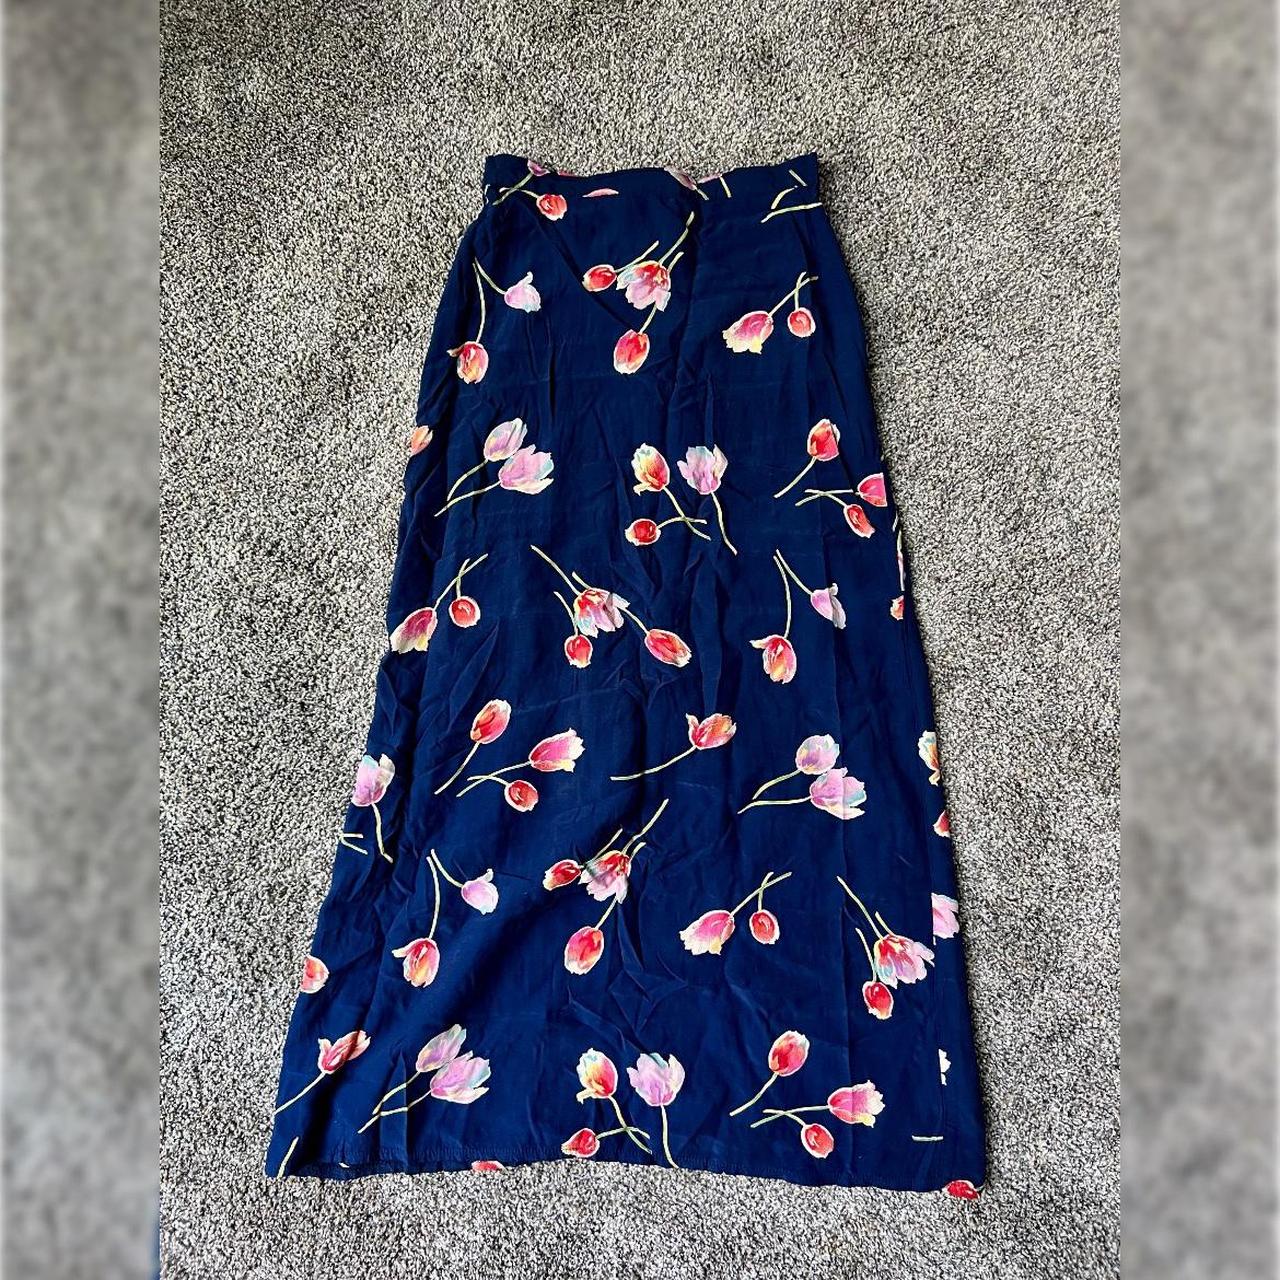 United Colors of Benetton Women's Blue and Pink Skirt | Depop